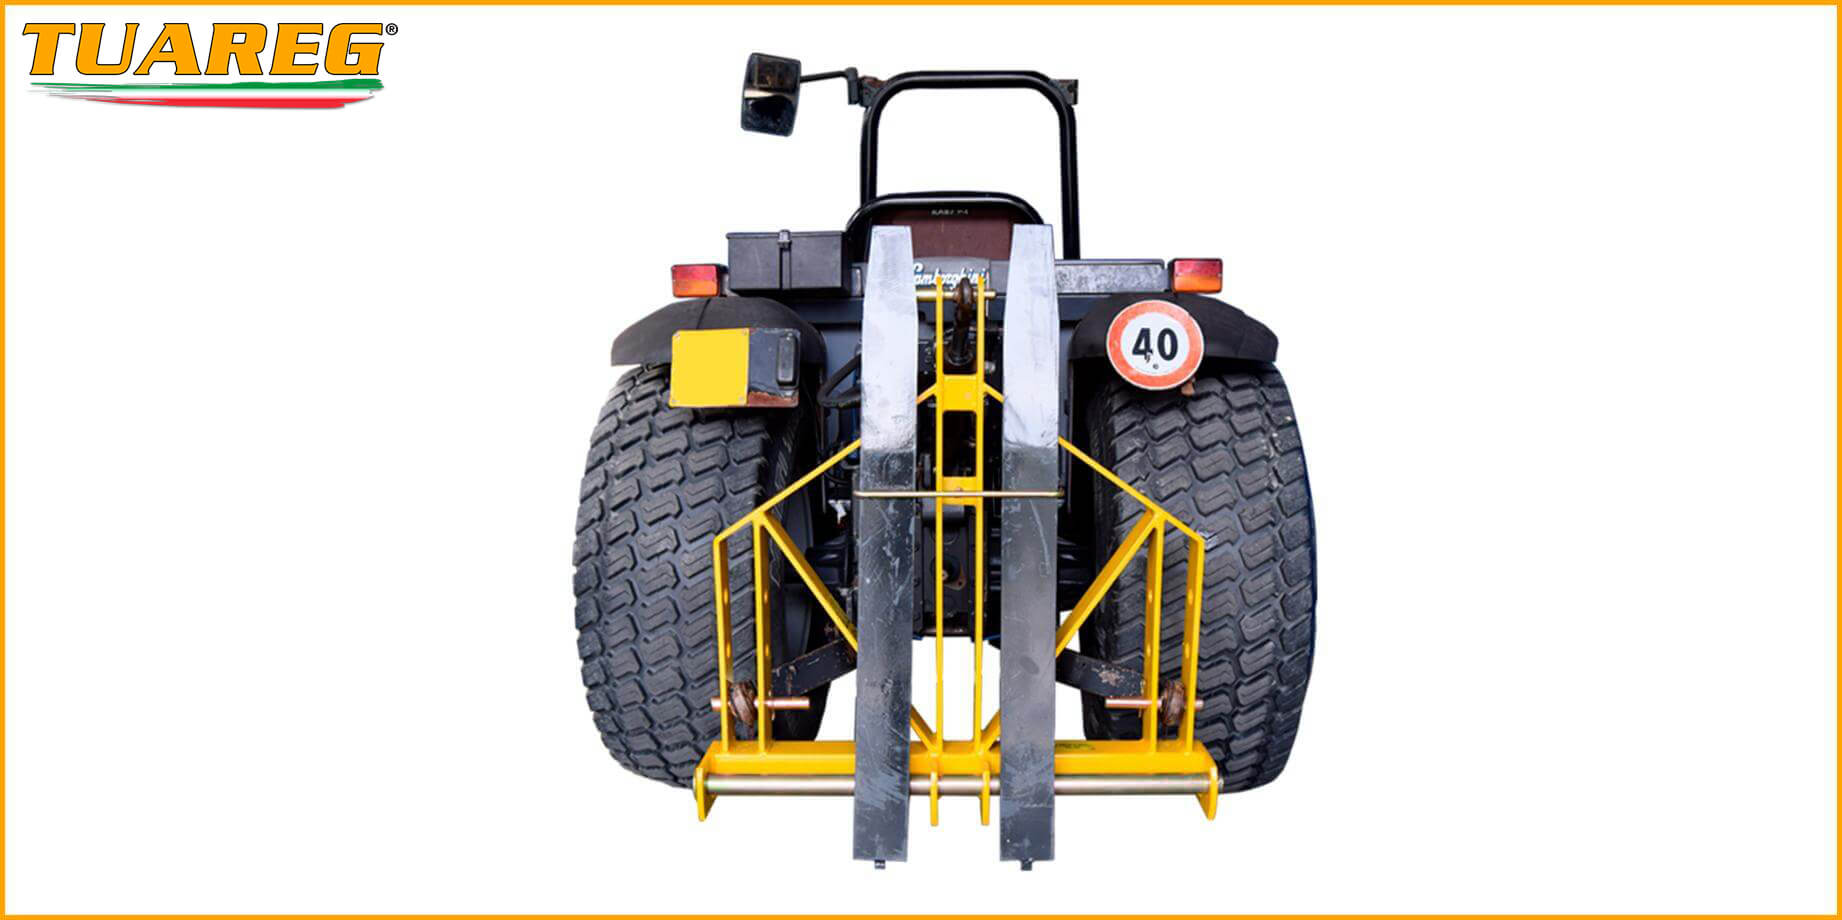 Forklift - Tuareg - Tractor towed equipment for beach cleaning